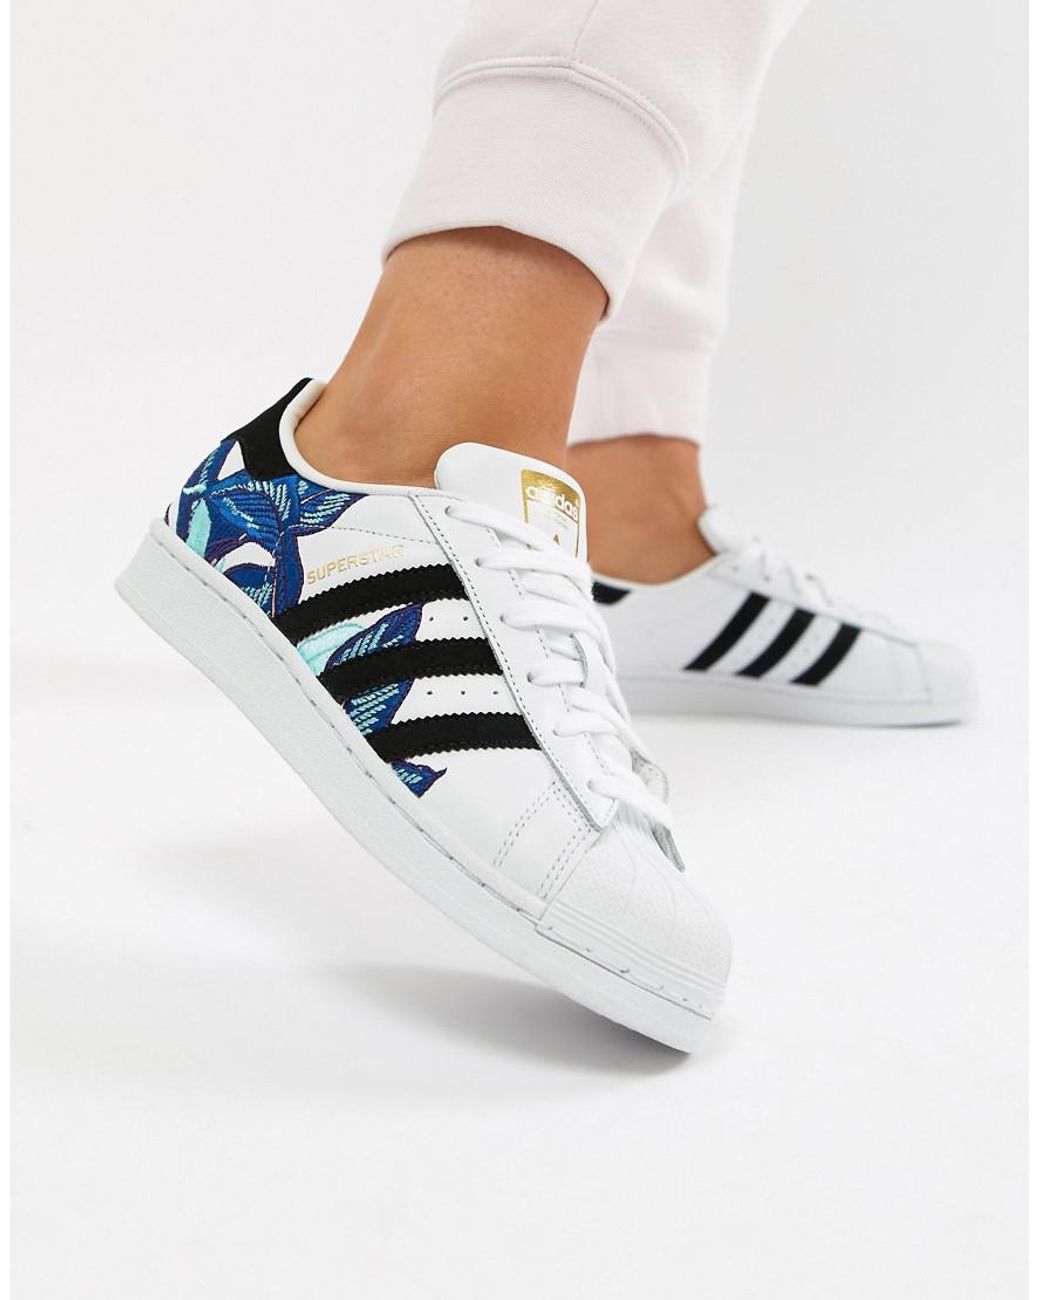 Sneakers | Superstar Originals Embroidery Lyst adidas In White With